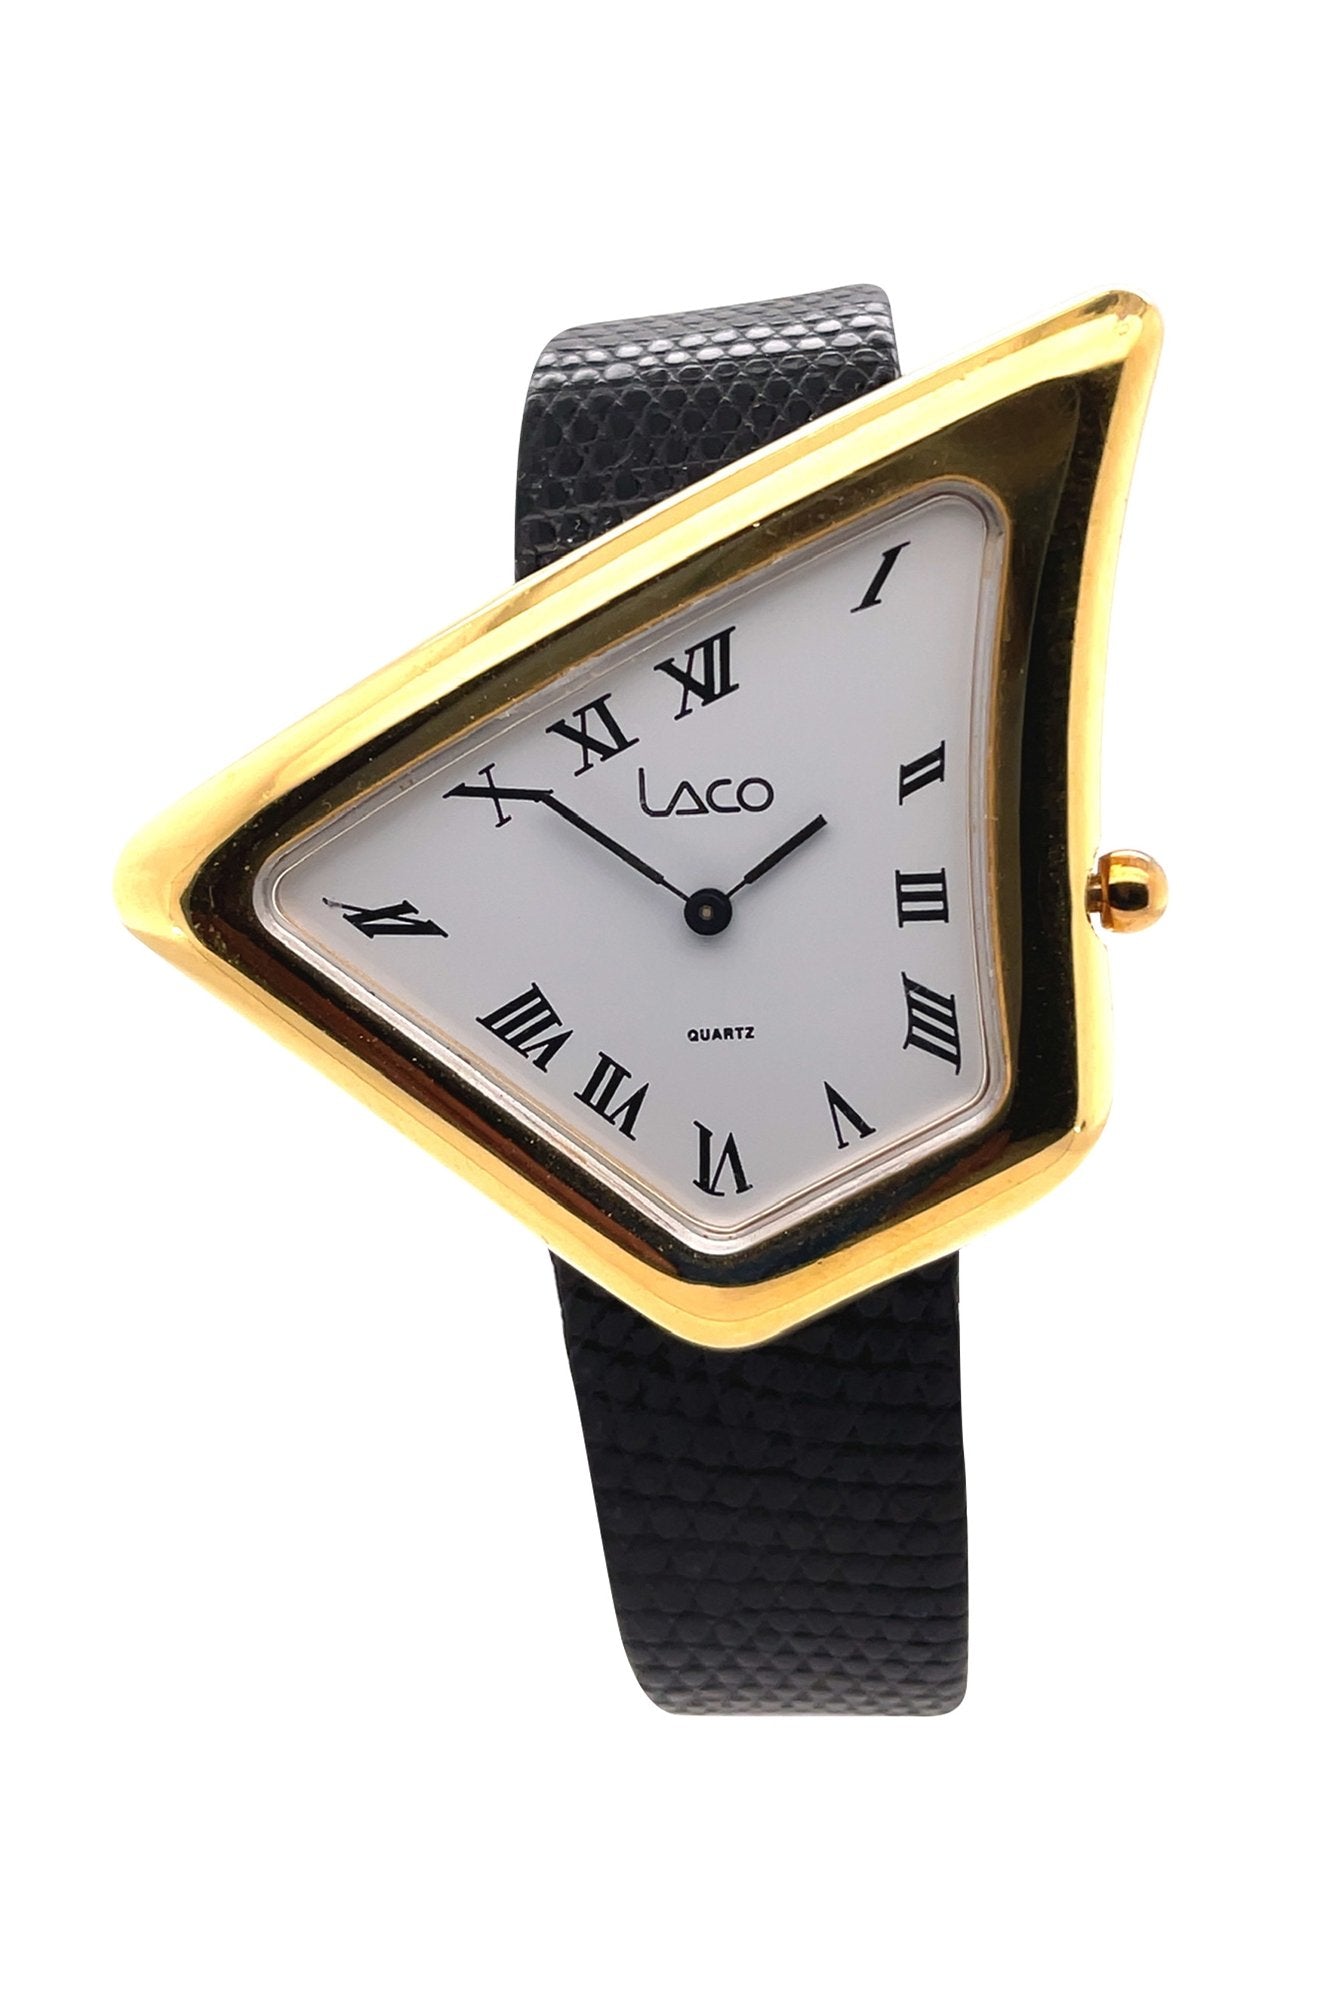 Laco Quartz - Counting Time Watch Purveyors